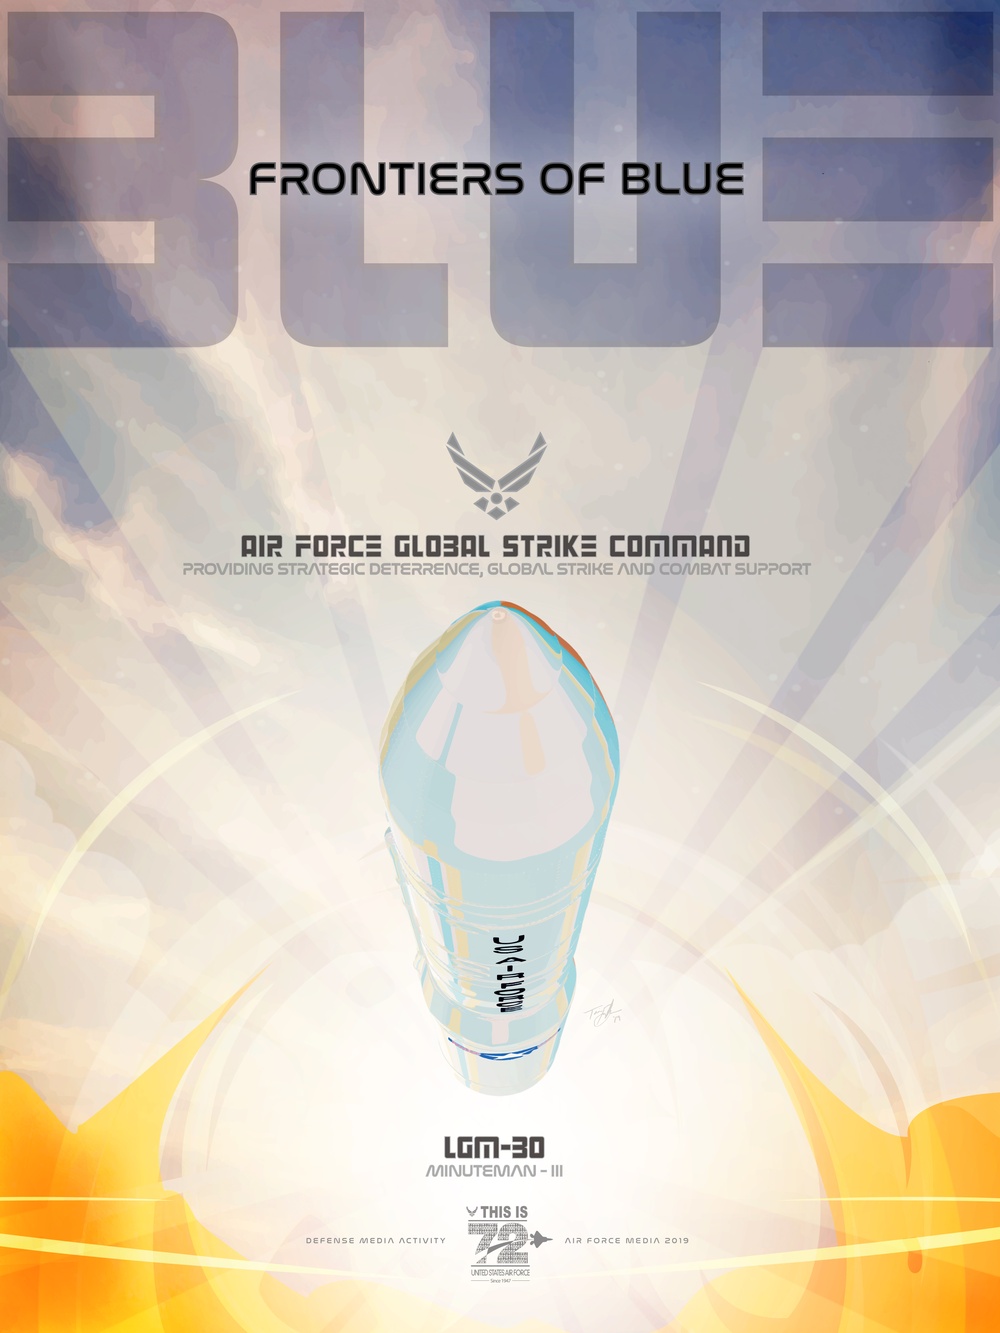 Frontiers of Blue - Air Force Global Strike Command